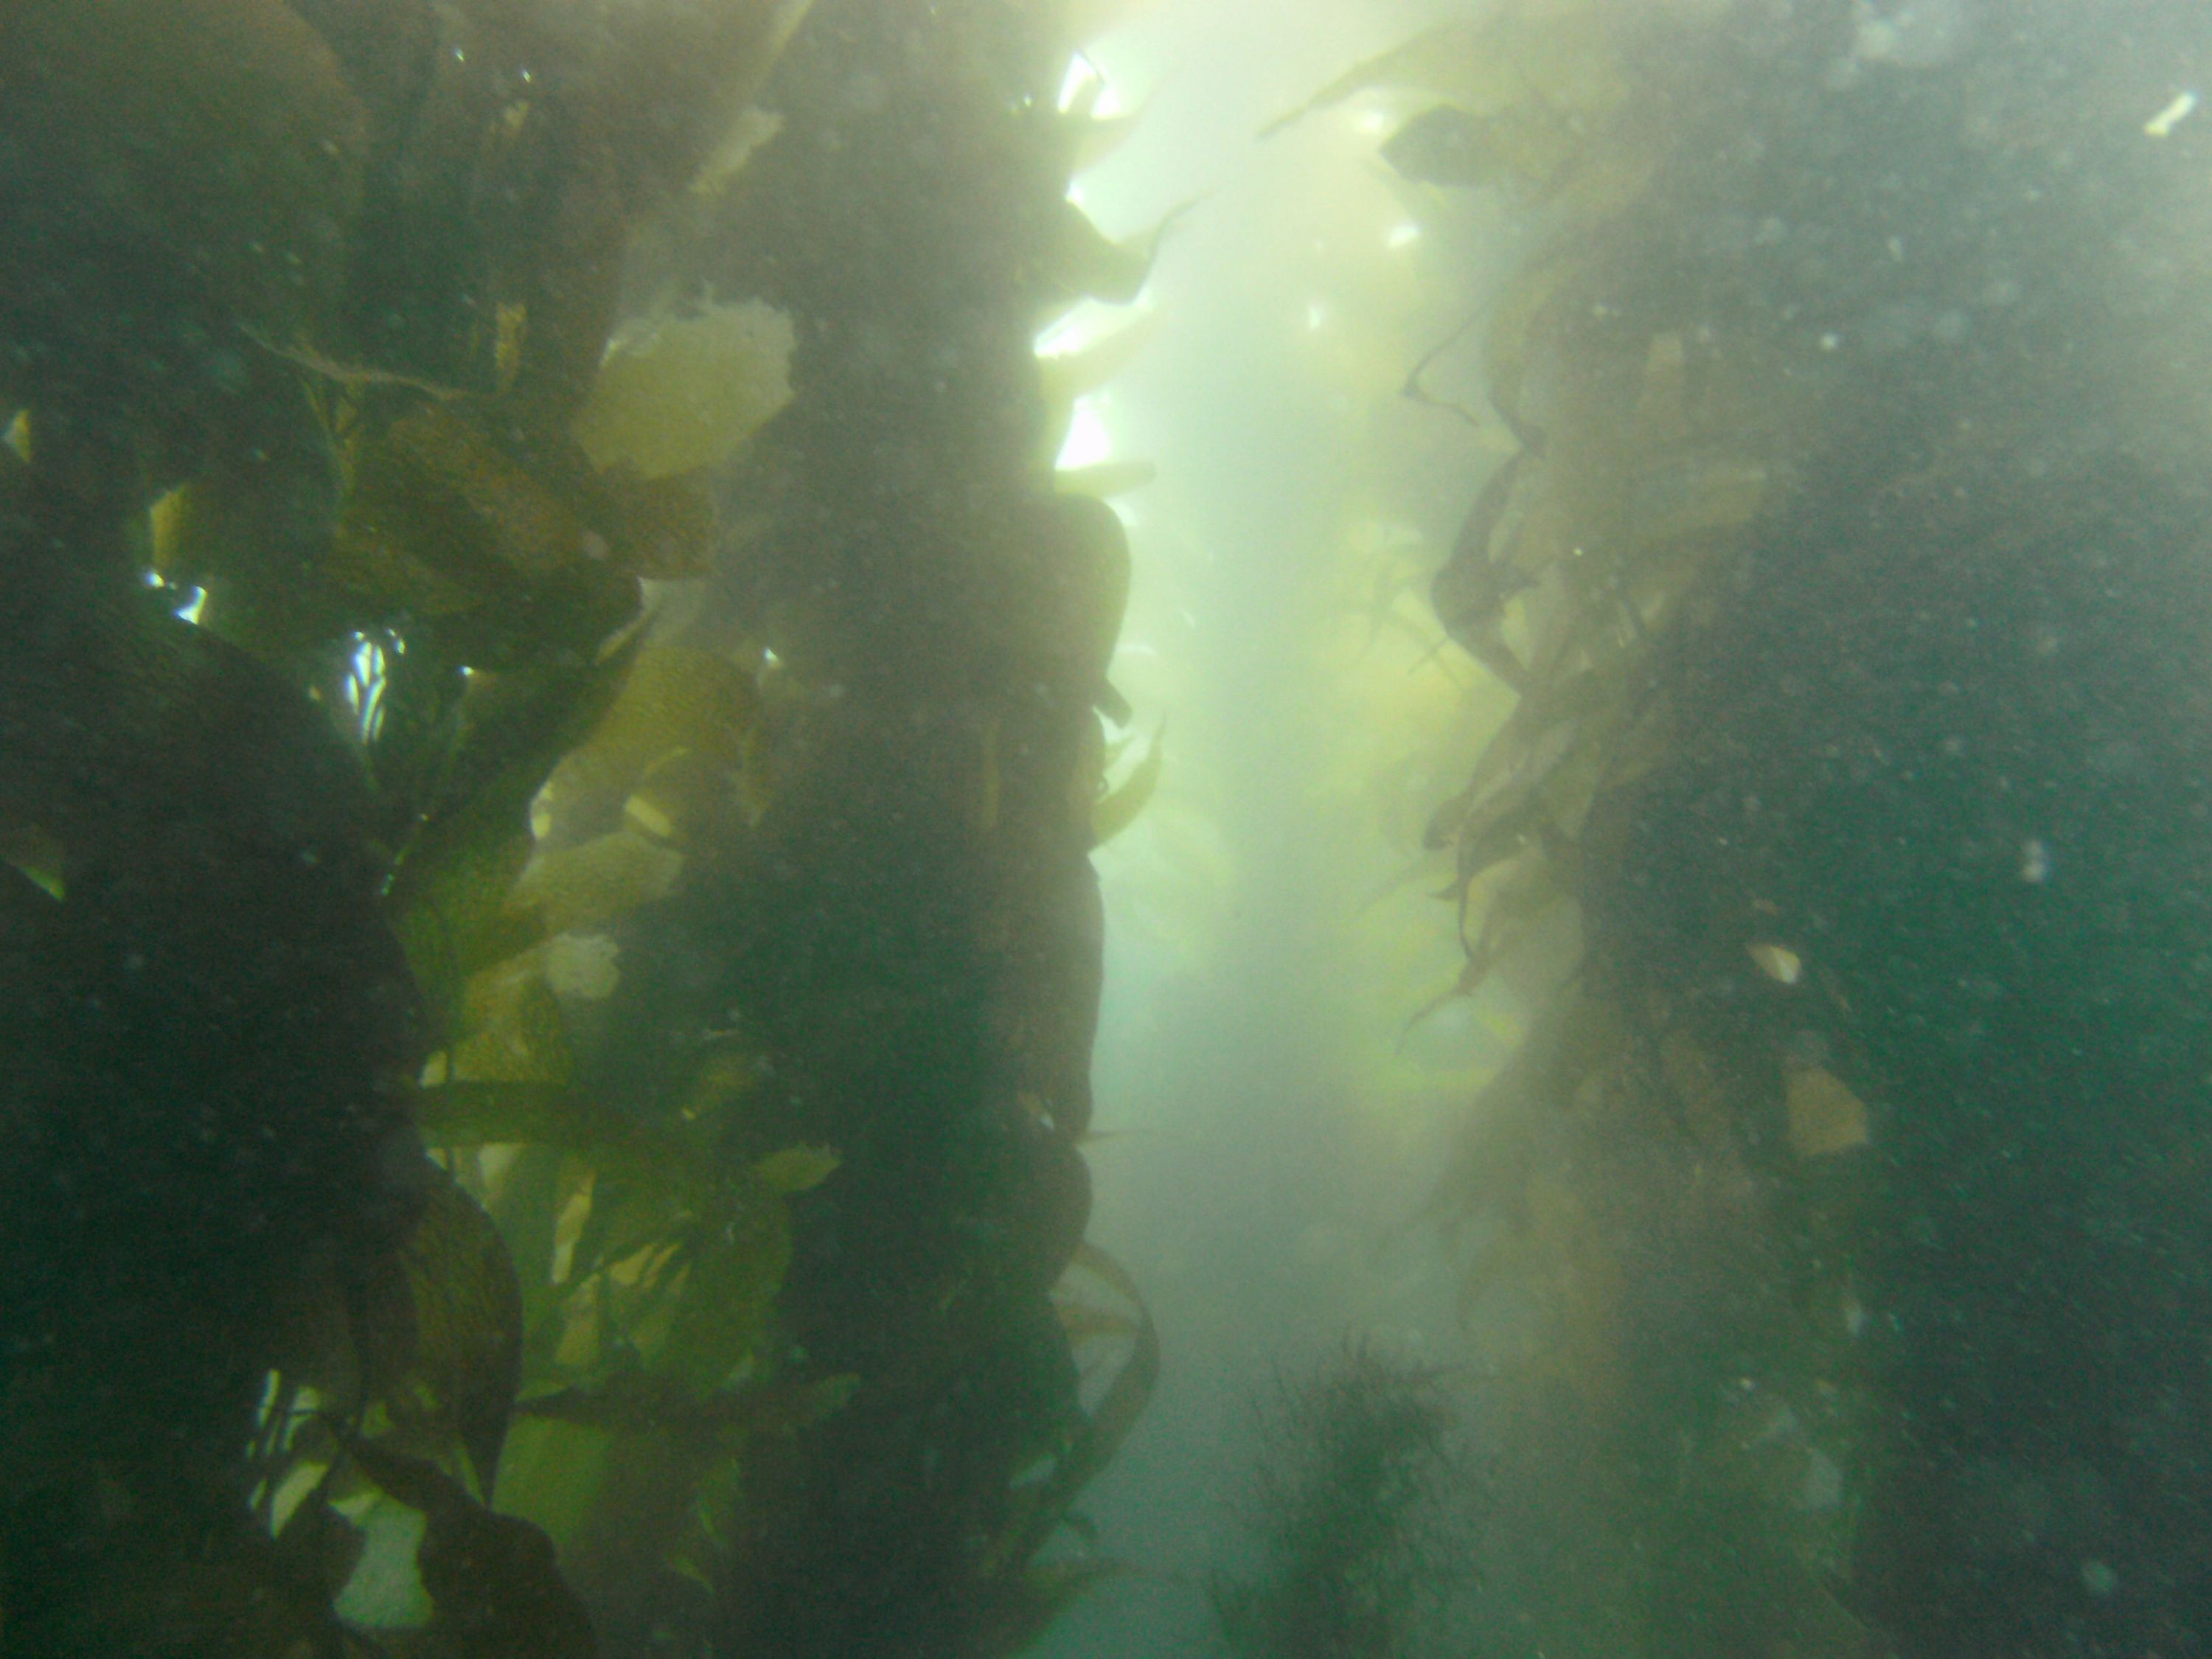 Giant Kelp from approx 25 feet